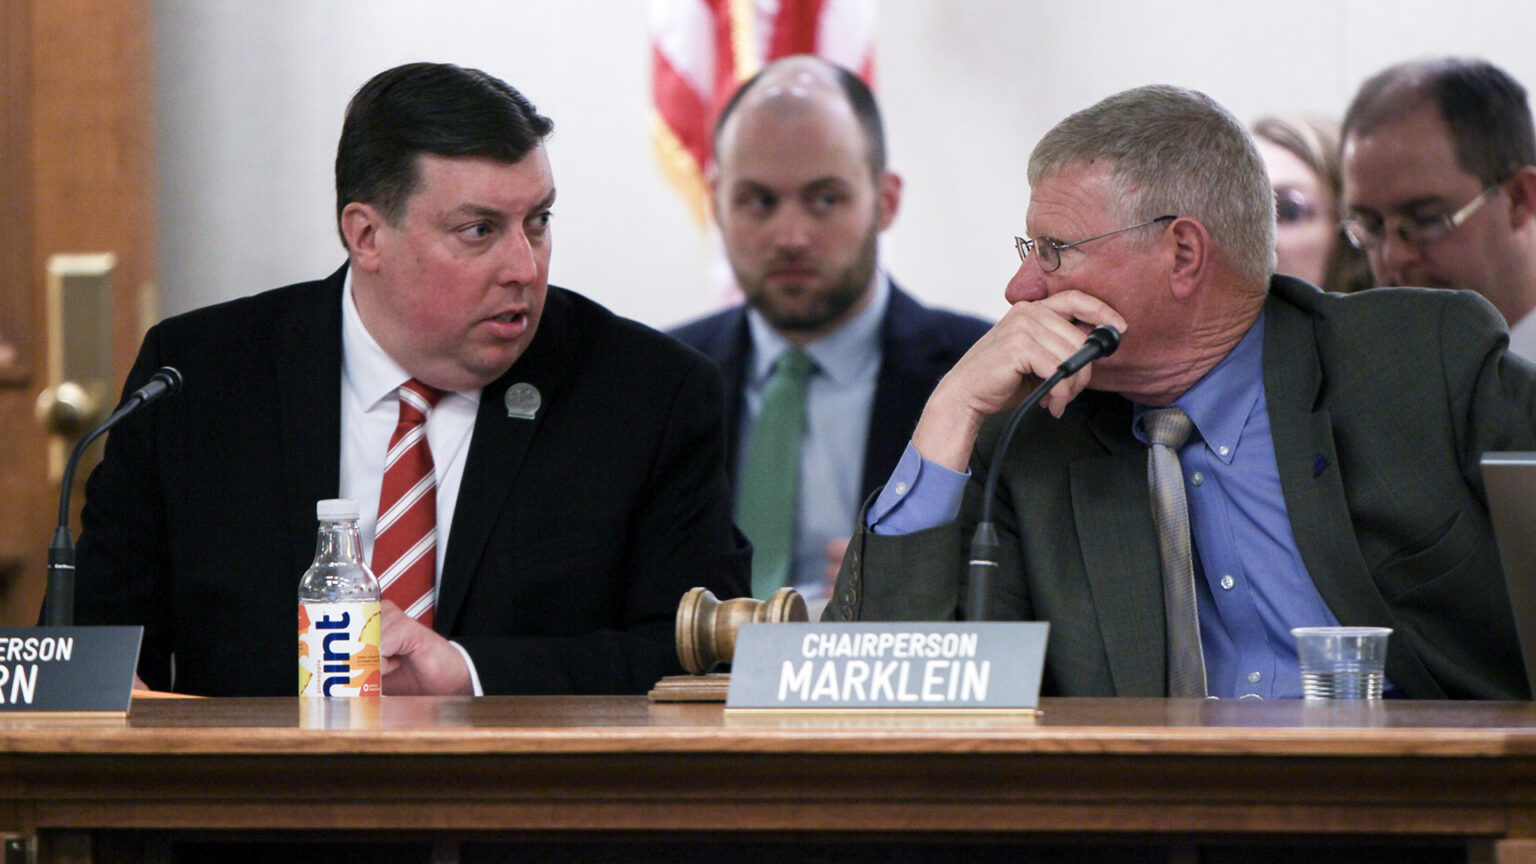 Mark Born and Howard Marklein sit at a legislative dais with microphones and signs with their names, speaking to each other and with other people seated in the background.